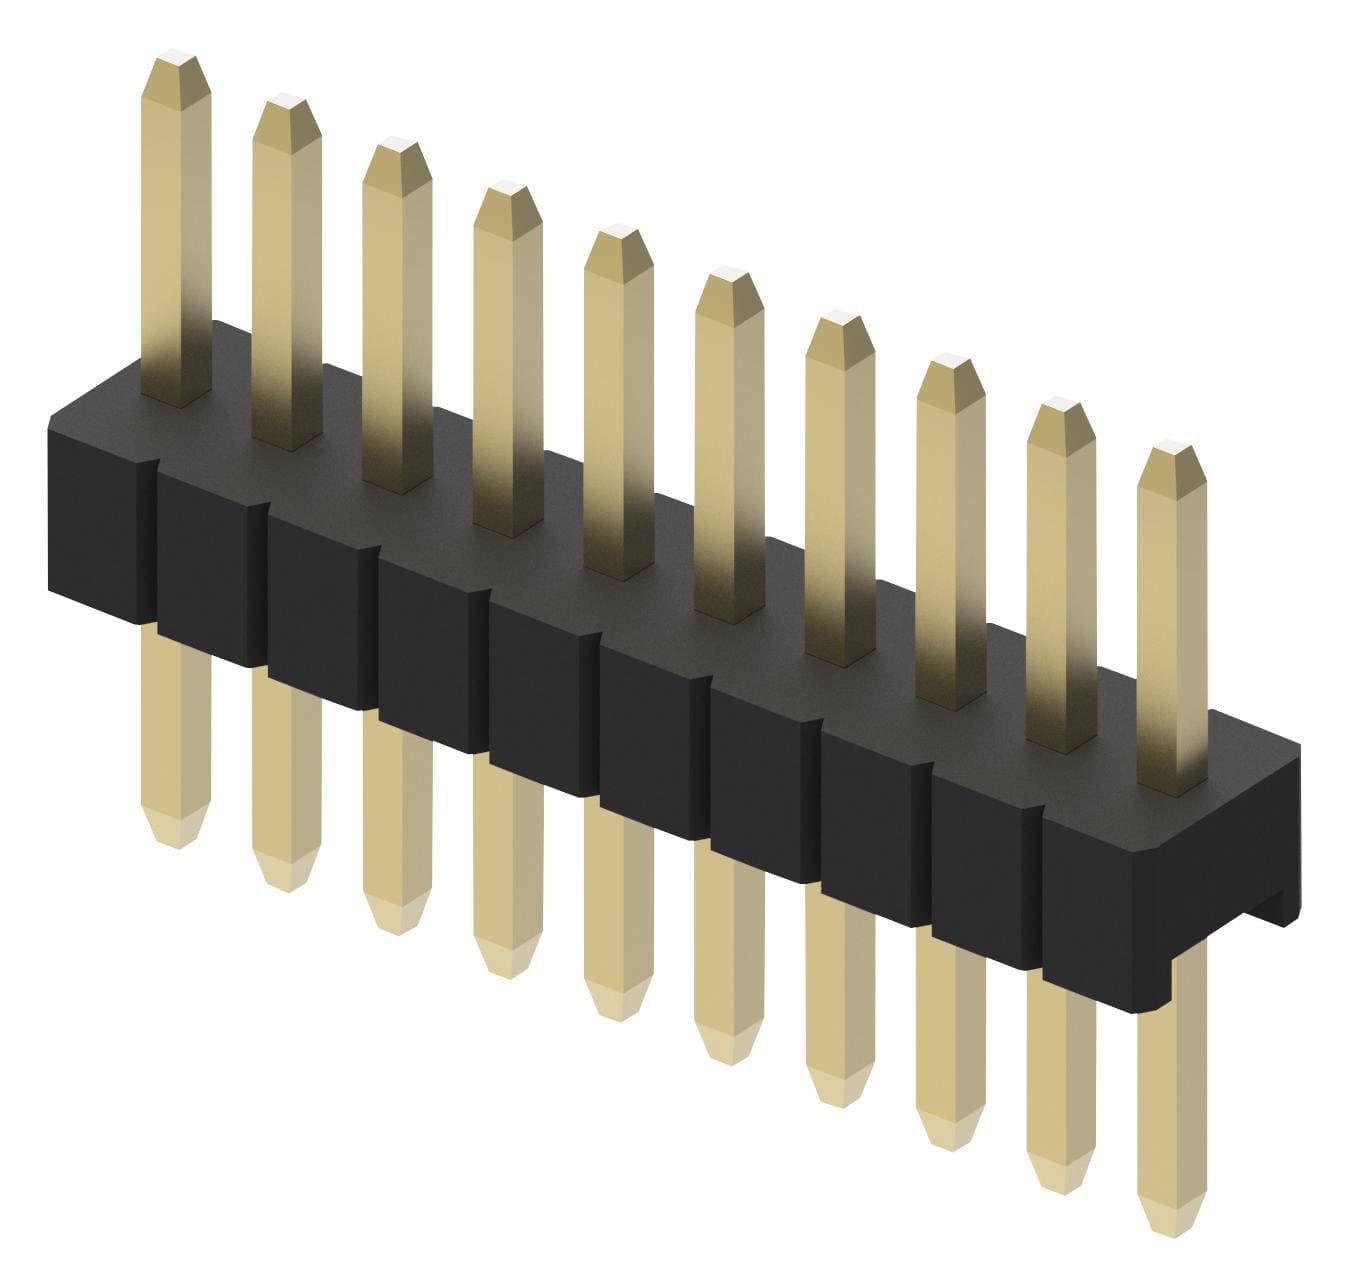 GCT (GLOBAL CONNECTOR TECHNOLOGY) Board-to-Board BD020-02-A-J-0350-0300-L-G CONNECTOR, HEADER, 2POS, 1ROW, 1.27MM GCT (GLOBAL CONNECTOR TECHNOLOGY) 2751420 BD020-02-A-J-0350-0300-L-G